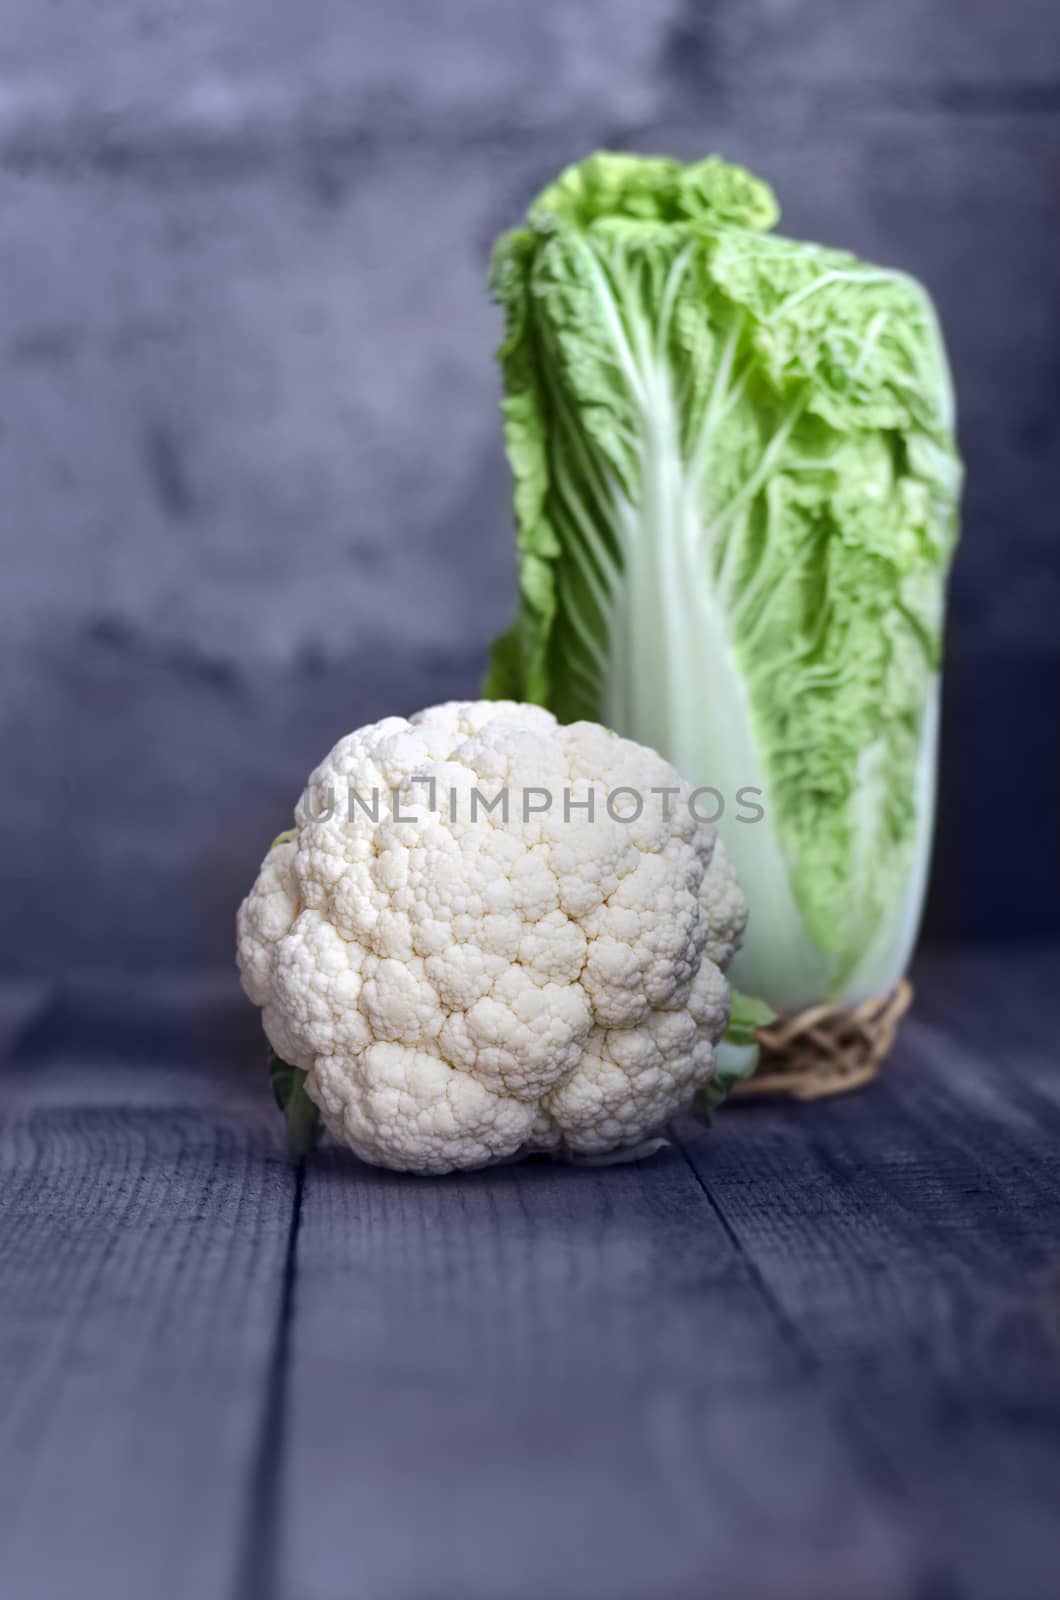 Cauliflower and cabbage on the old Board in a rustic style, bokeh